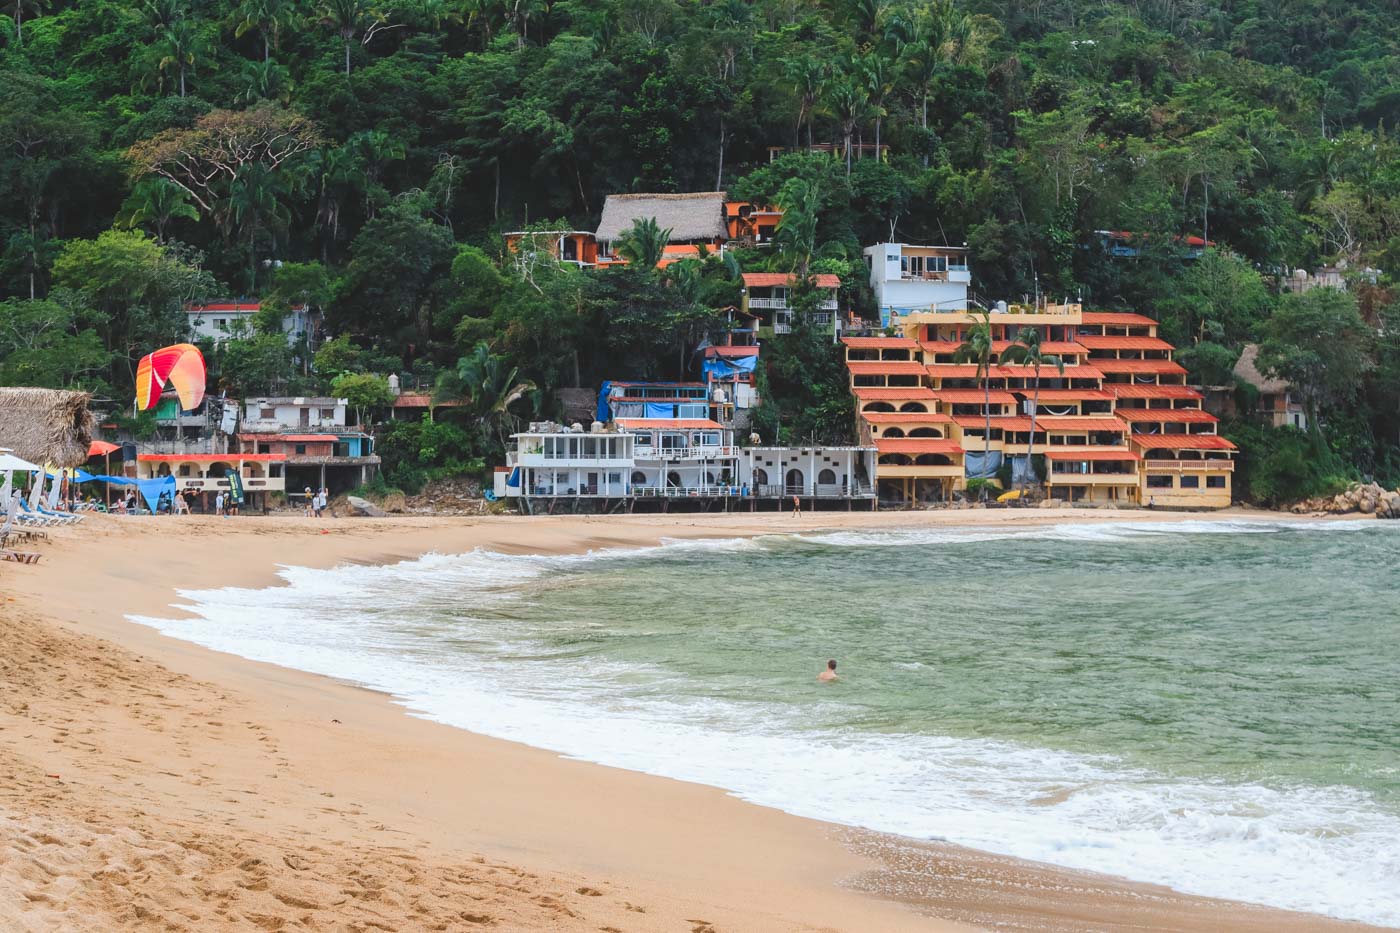 A man swimming in the ocean at an empty Yelapa Beach with a view of hotels in the distance.